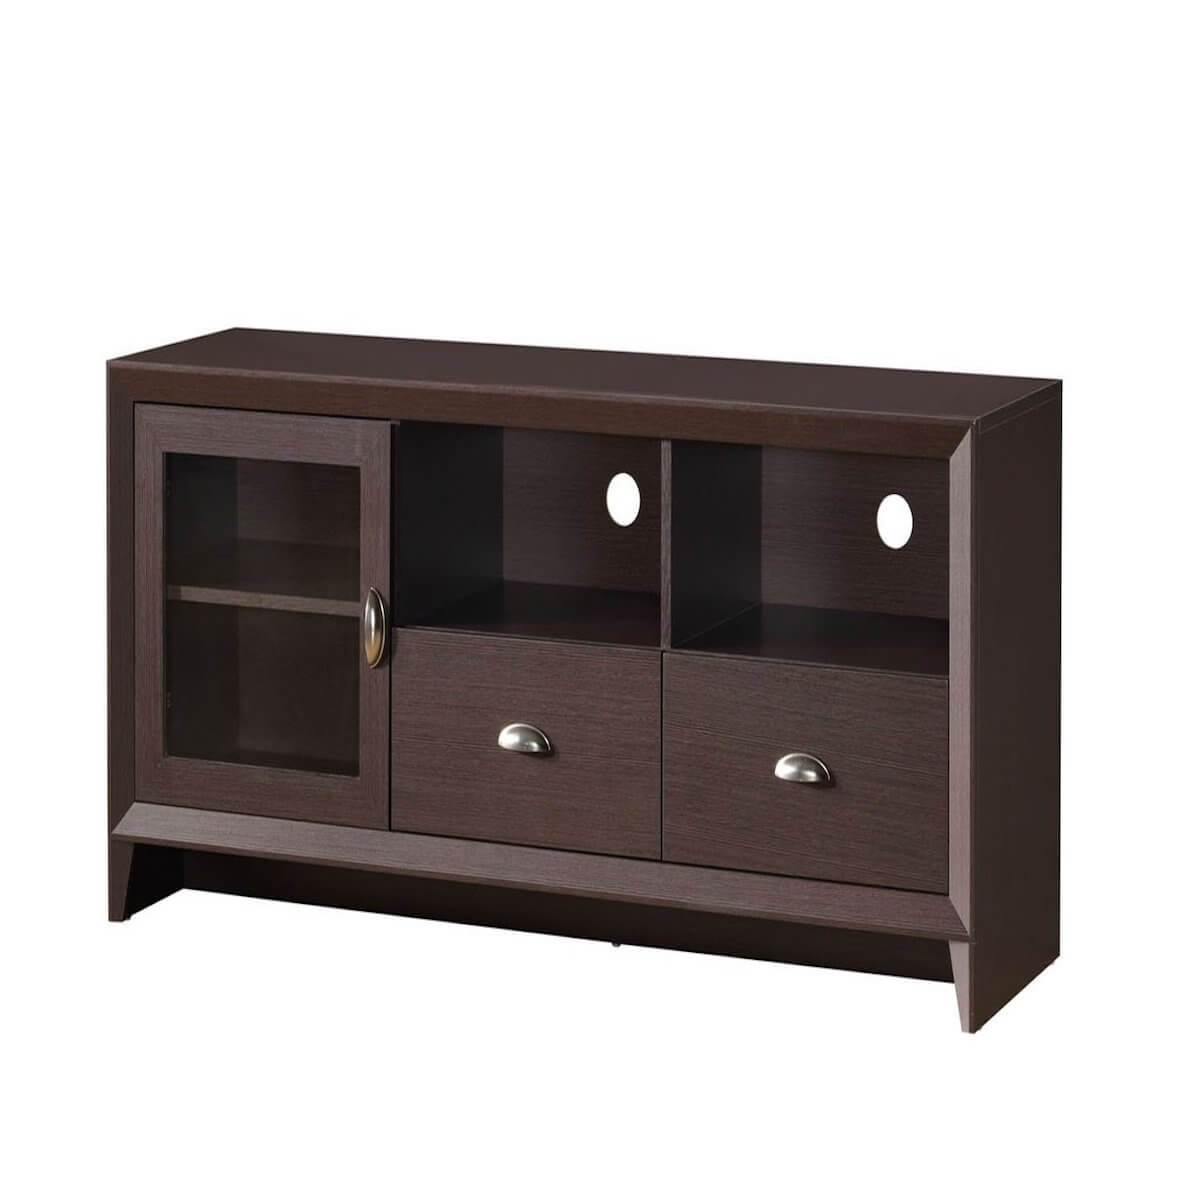 Techni Mobili Wenge Modern TV Stand with Storage for TVs Up To 60" RTA-8807-WN